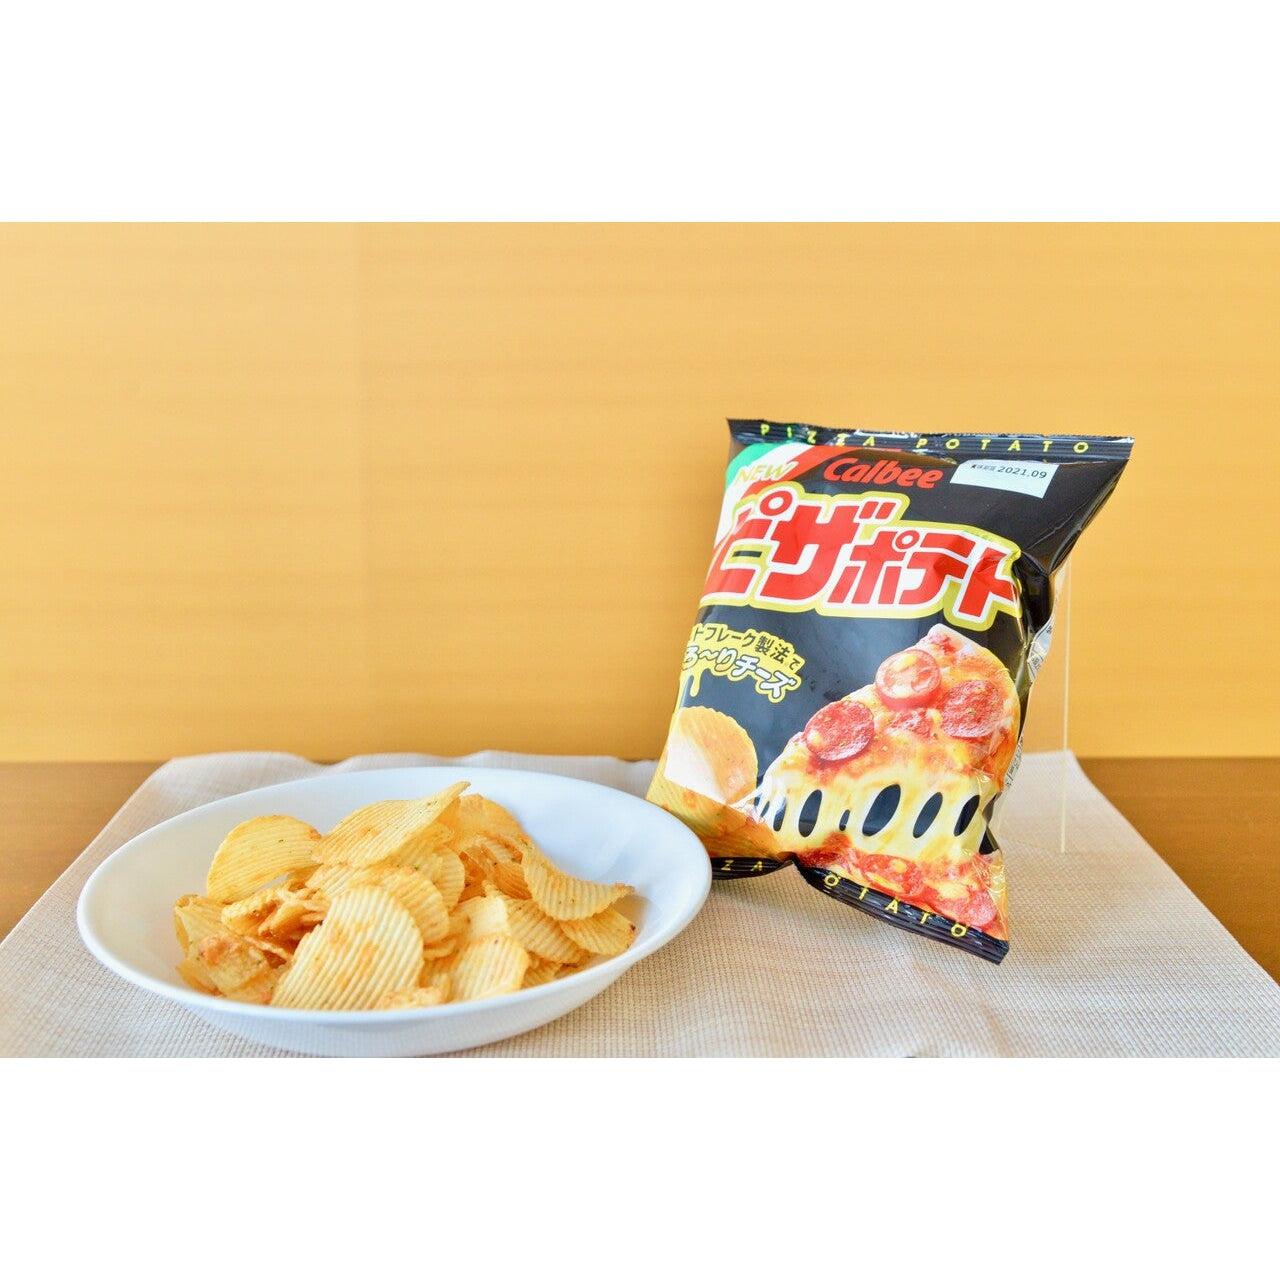 Calbee Pizza Potato Chips 60g (Pack of 3 Bags) - YOYO JAPAN